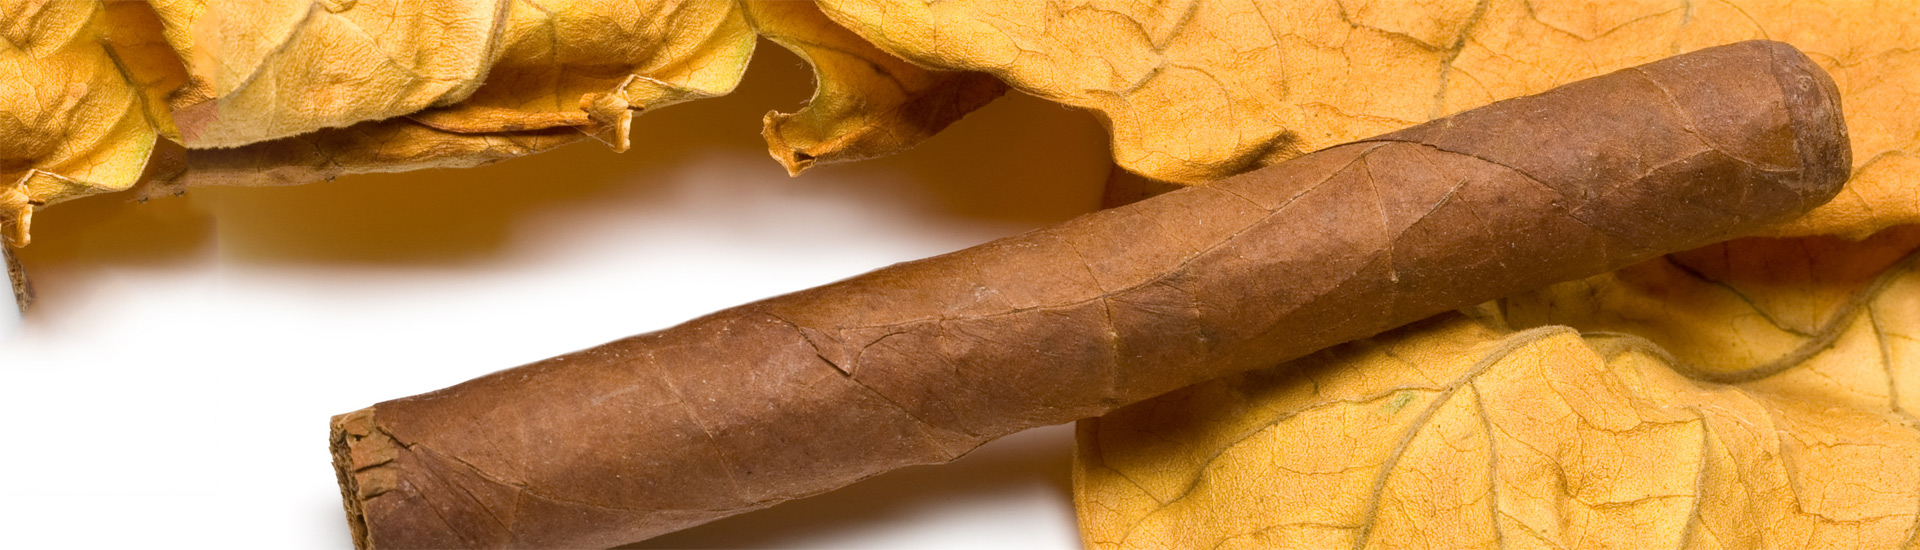 Cigar With Tobacco Leaves